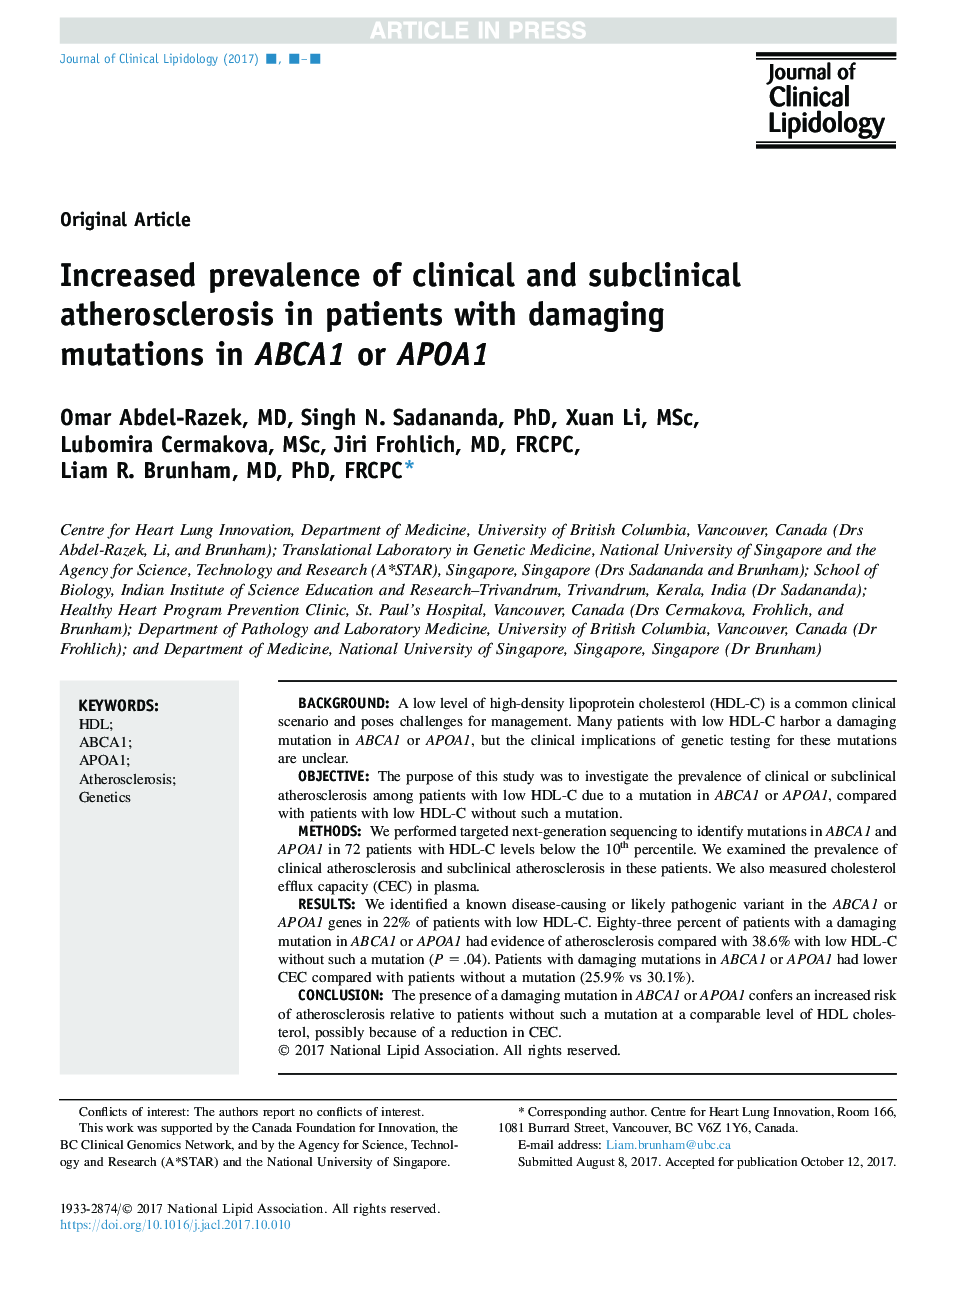 Increased prevalence of clinical and subclinical atherosclerosis in patients with damaging mutations in ABCA1 or APOA1